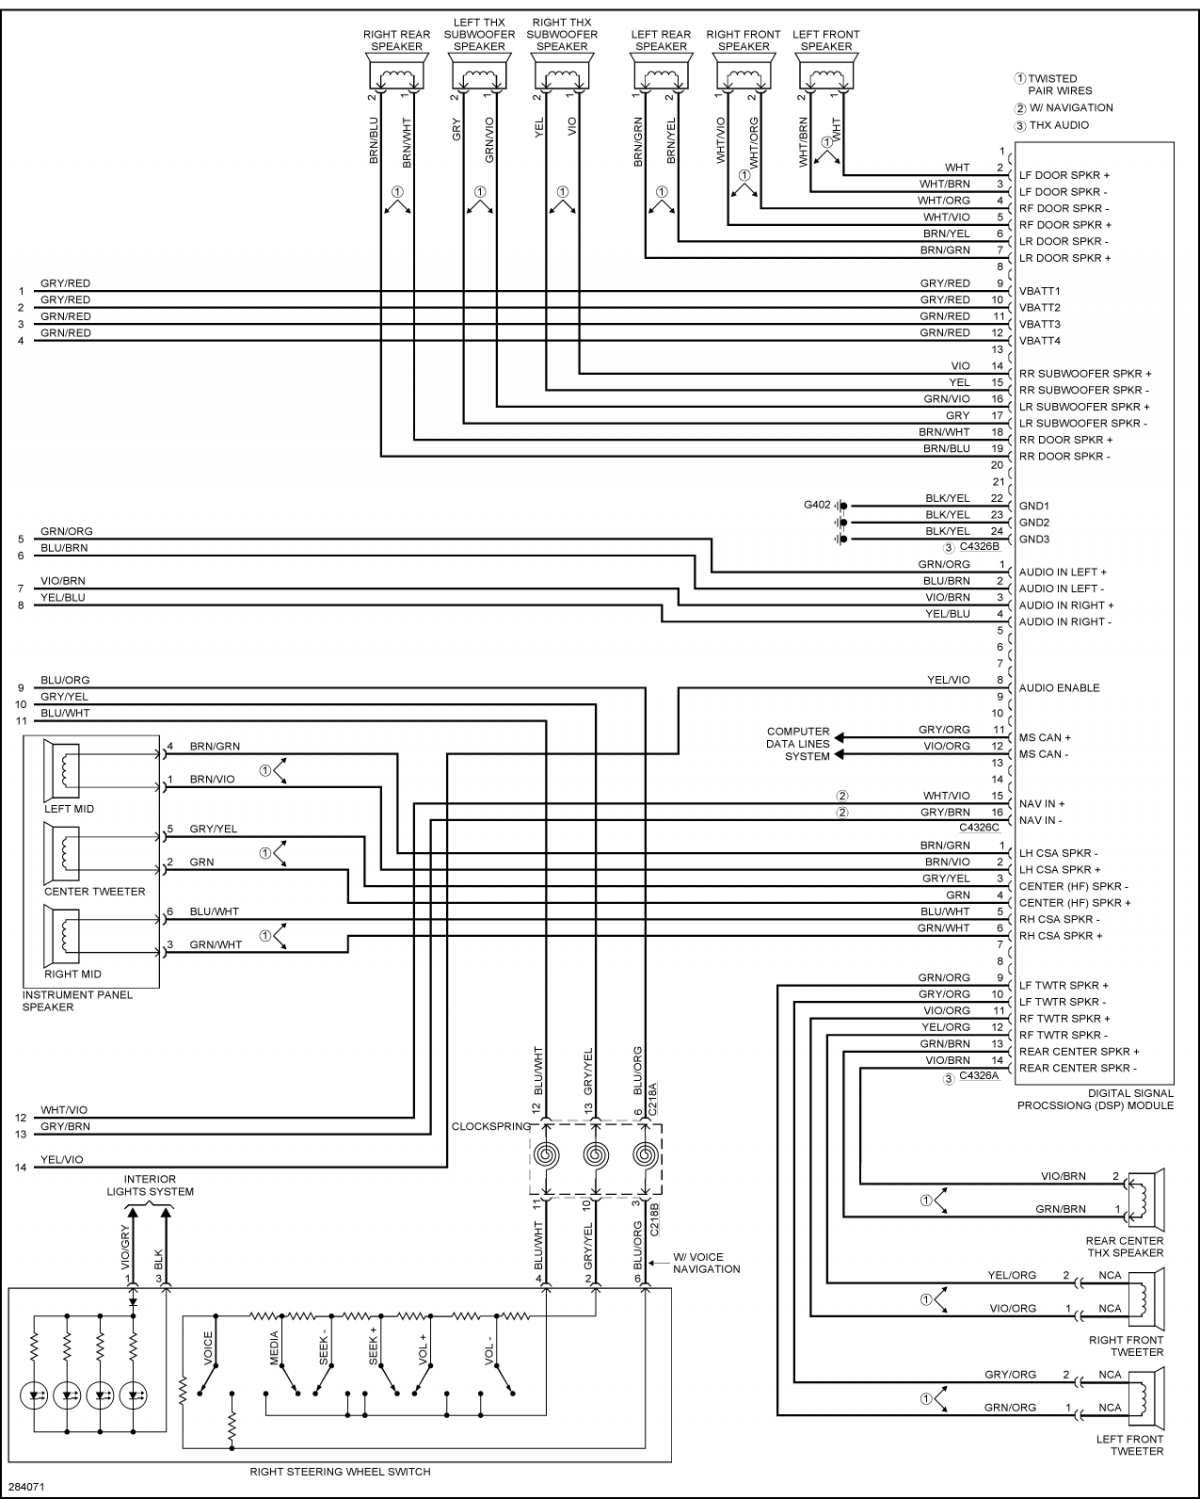 2006 Lincoln Zephyr Amp Wiring Diagram Pictures - Wiring Diagram Sample 2006 Lincoln Town Car Radio Wiring Diagram